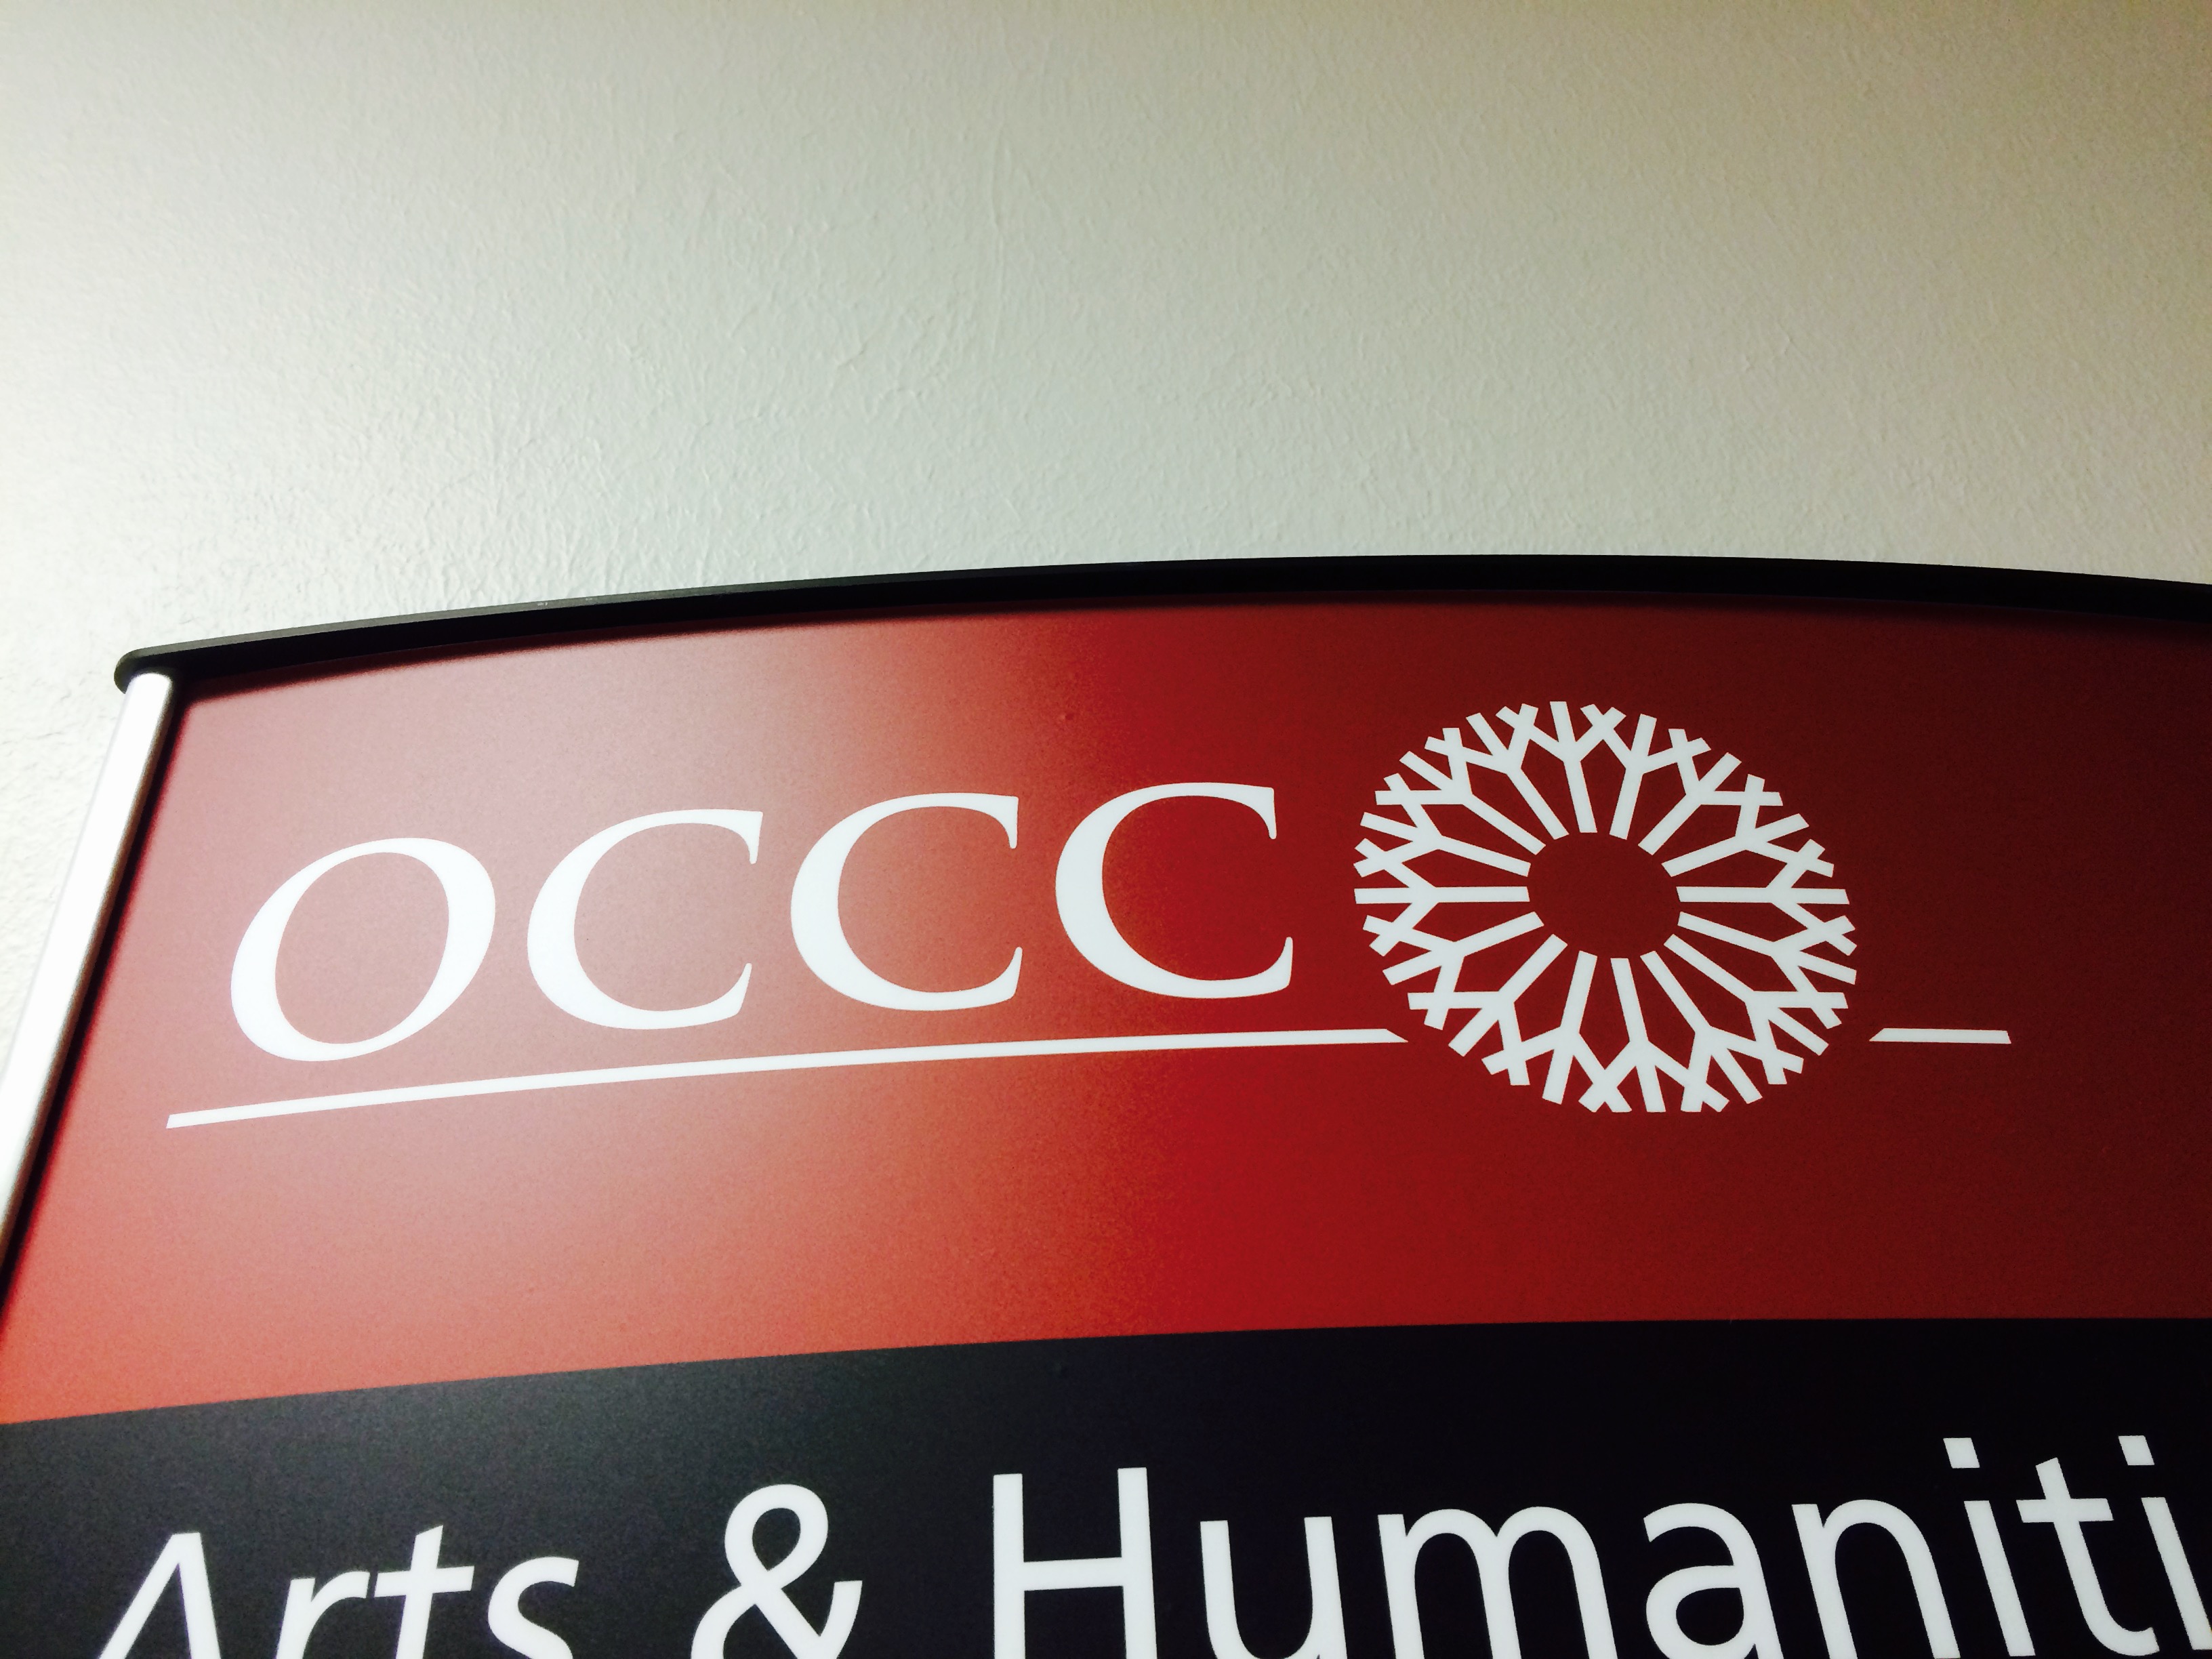 Survey shows OCCC students quite satisfied